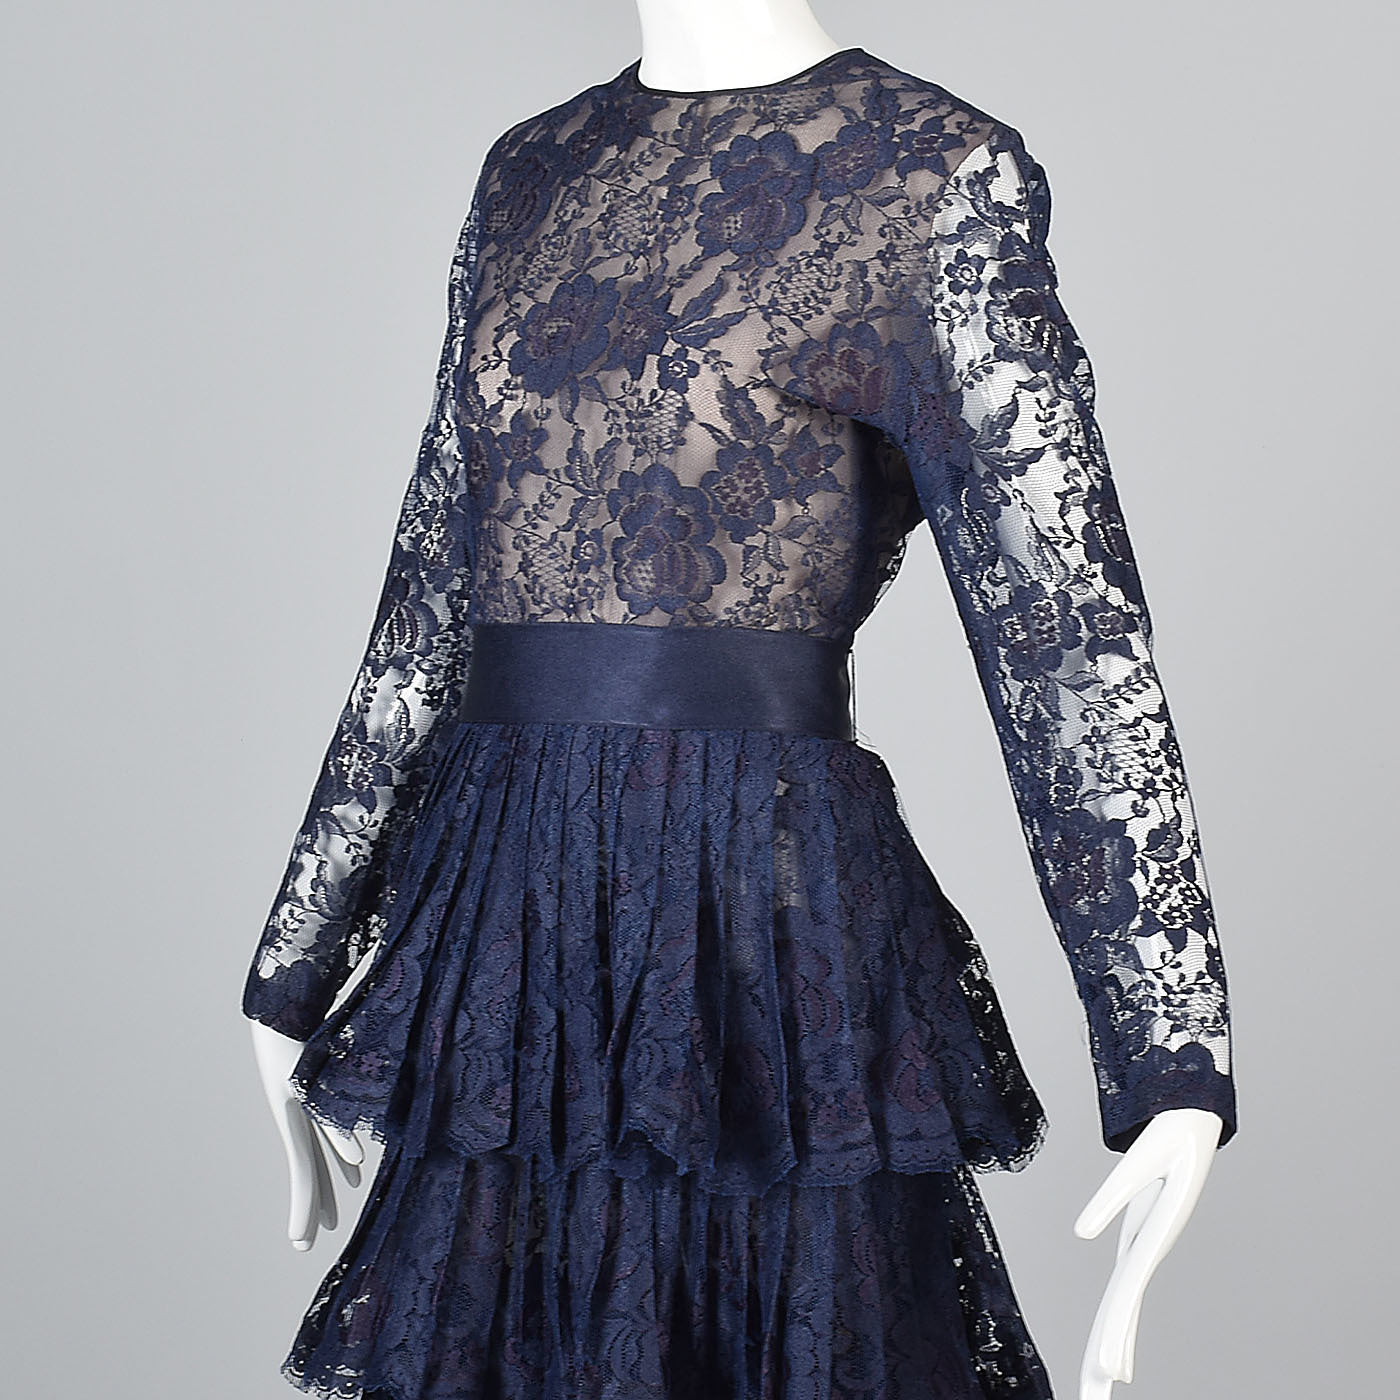 1970s Scaasi Boutique Navy Blue Formal Lace Evening Dress